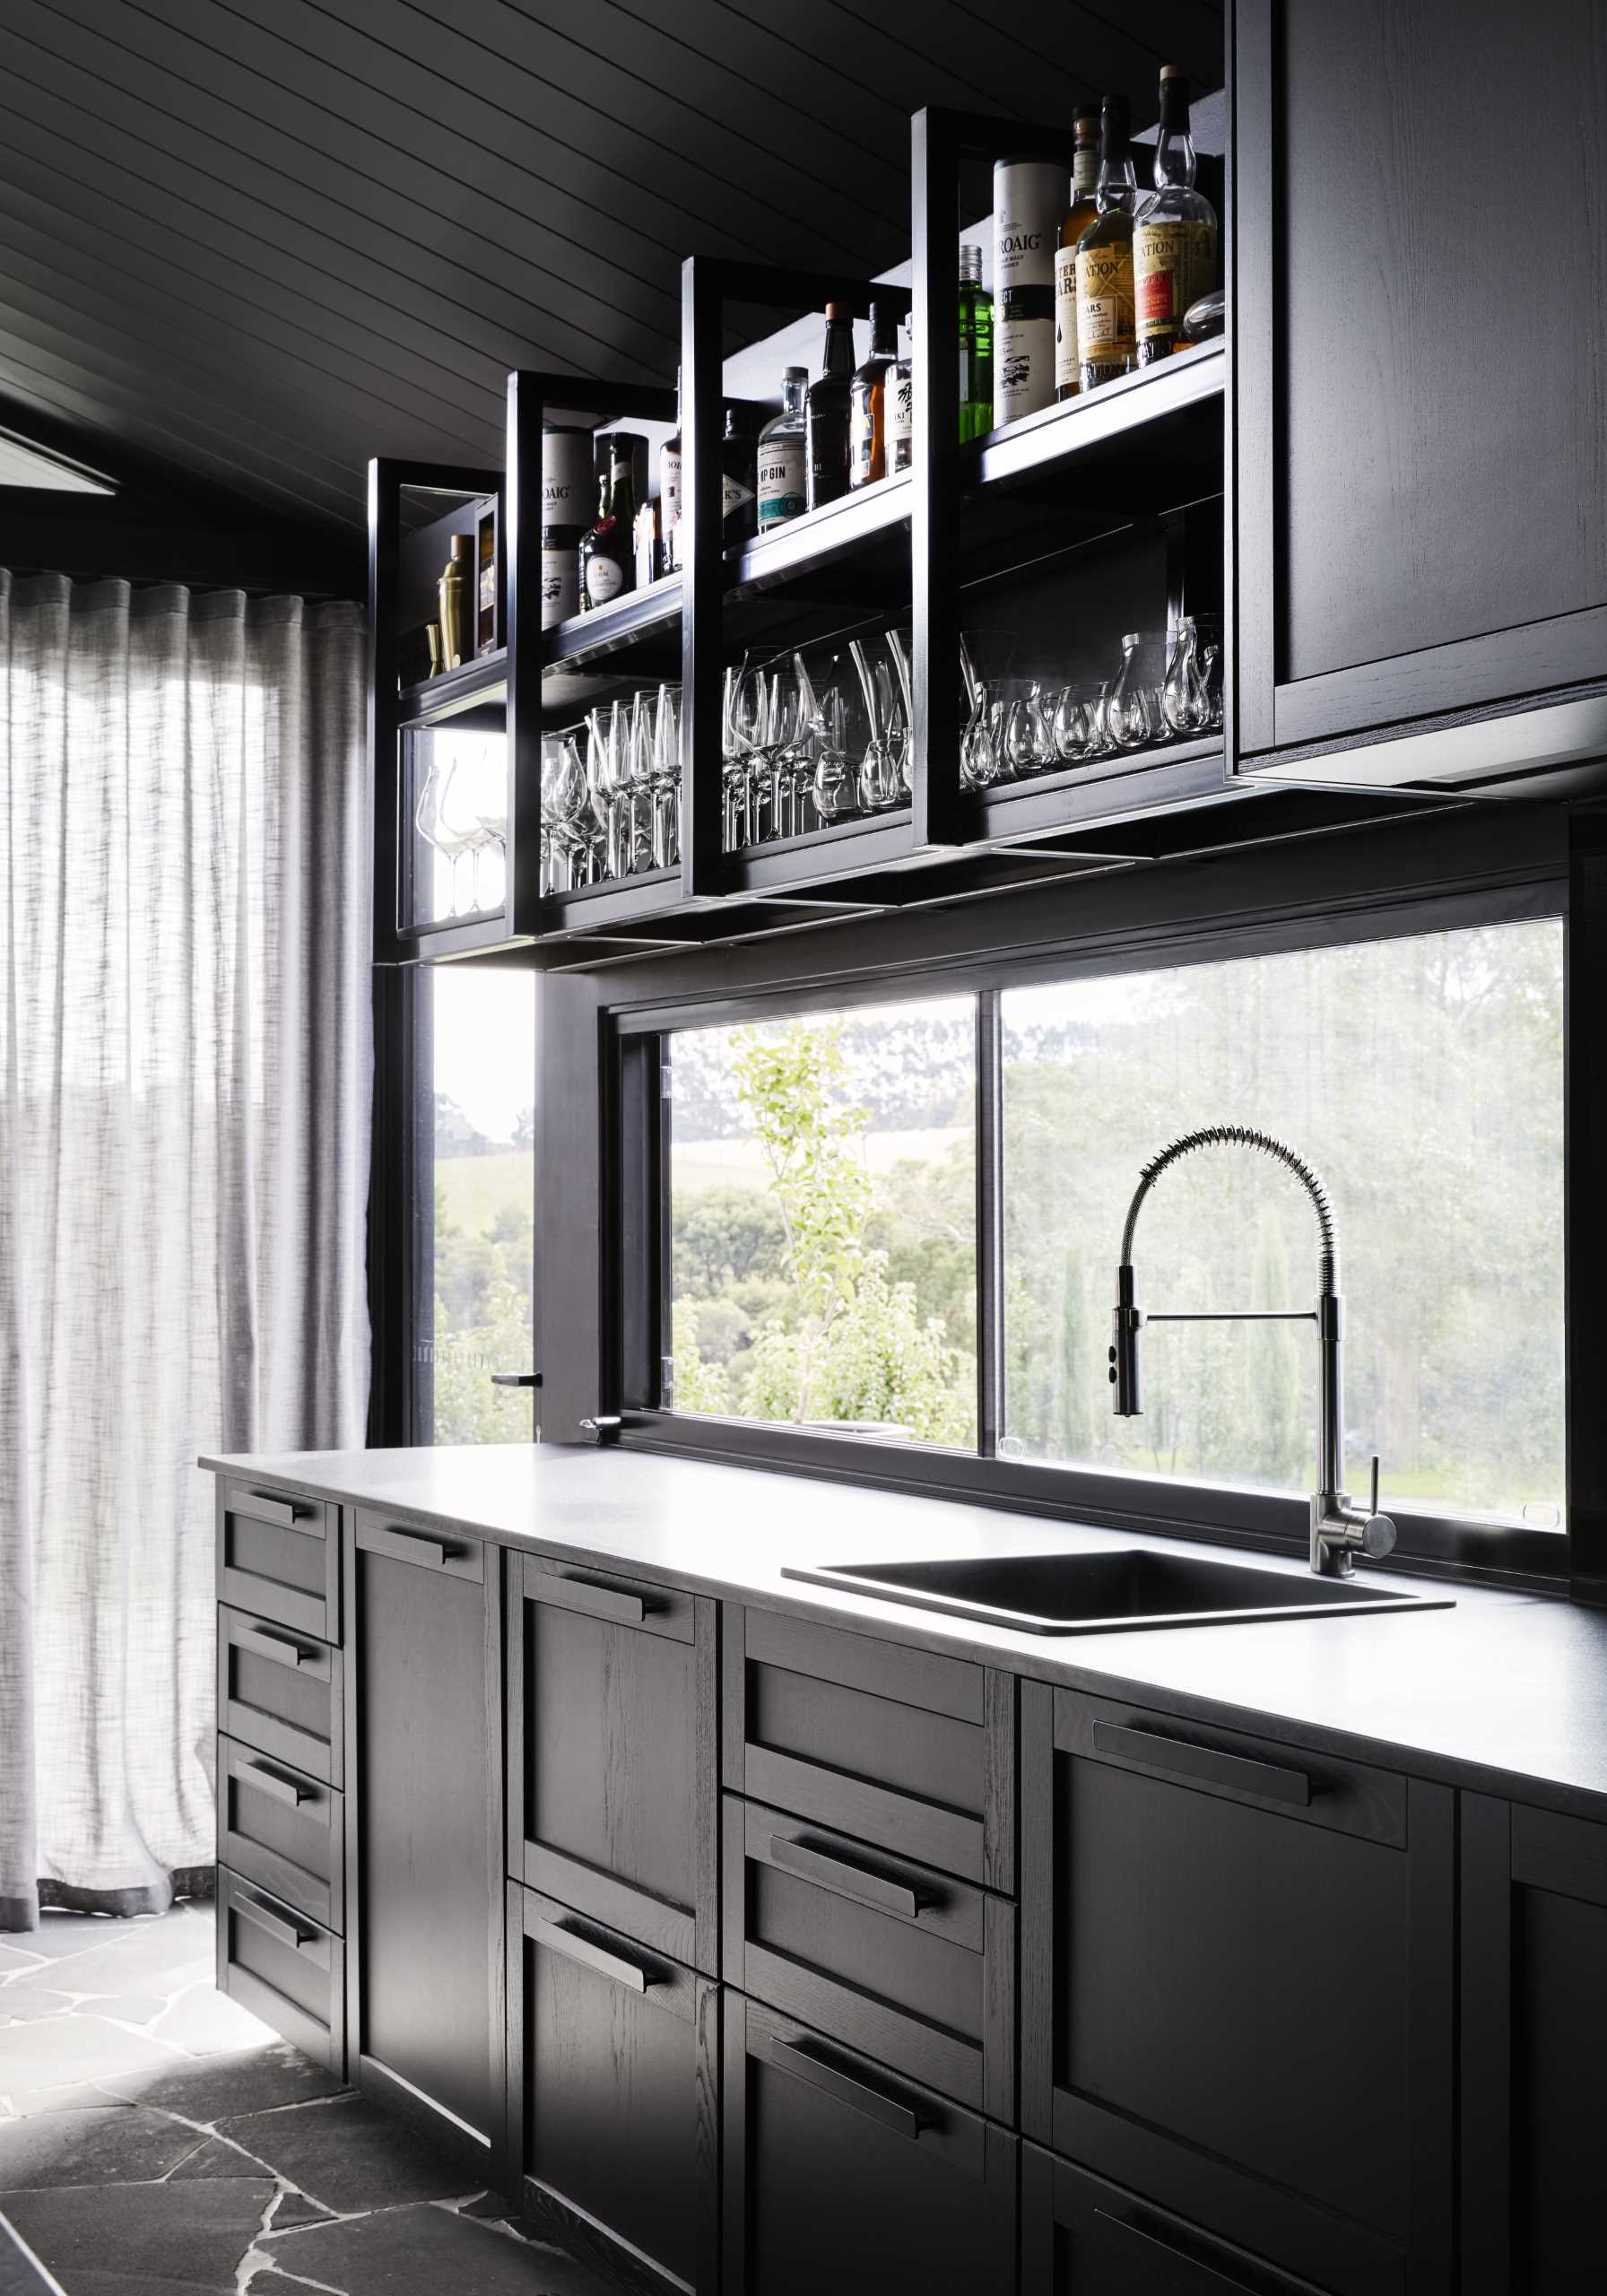 A modern black kitchen that's designed as a full-sized bar with a gentleman's club aesthetic.